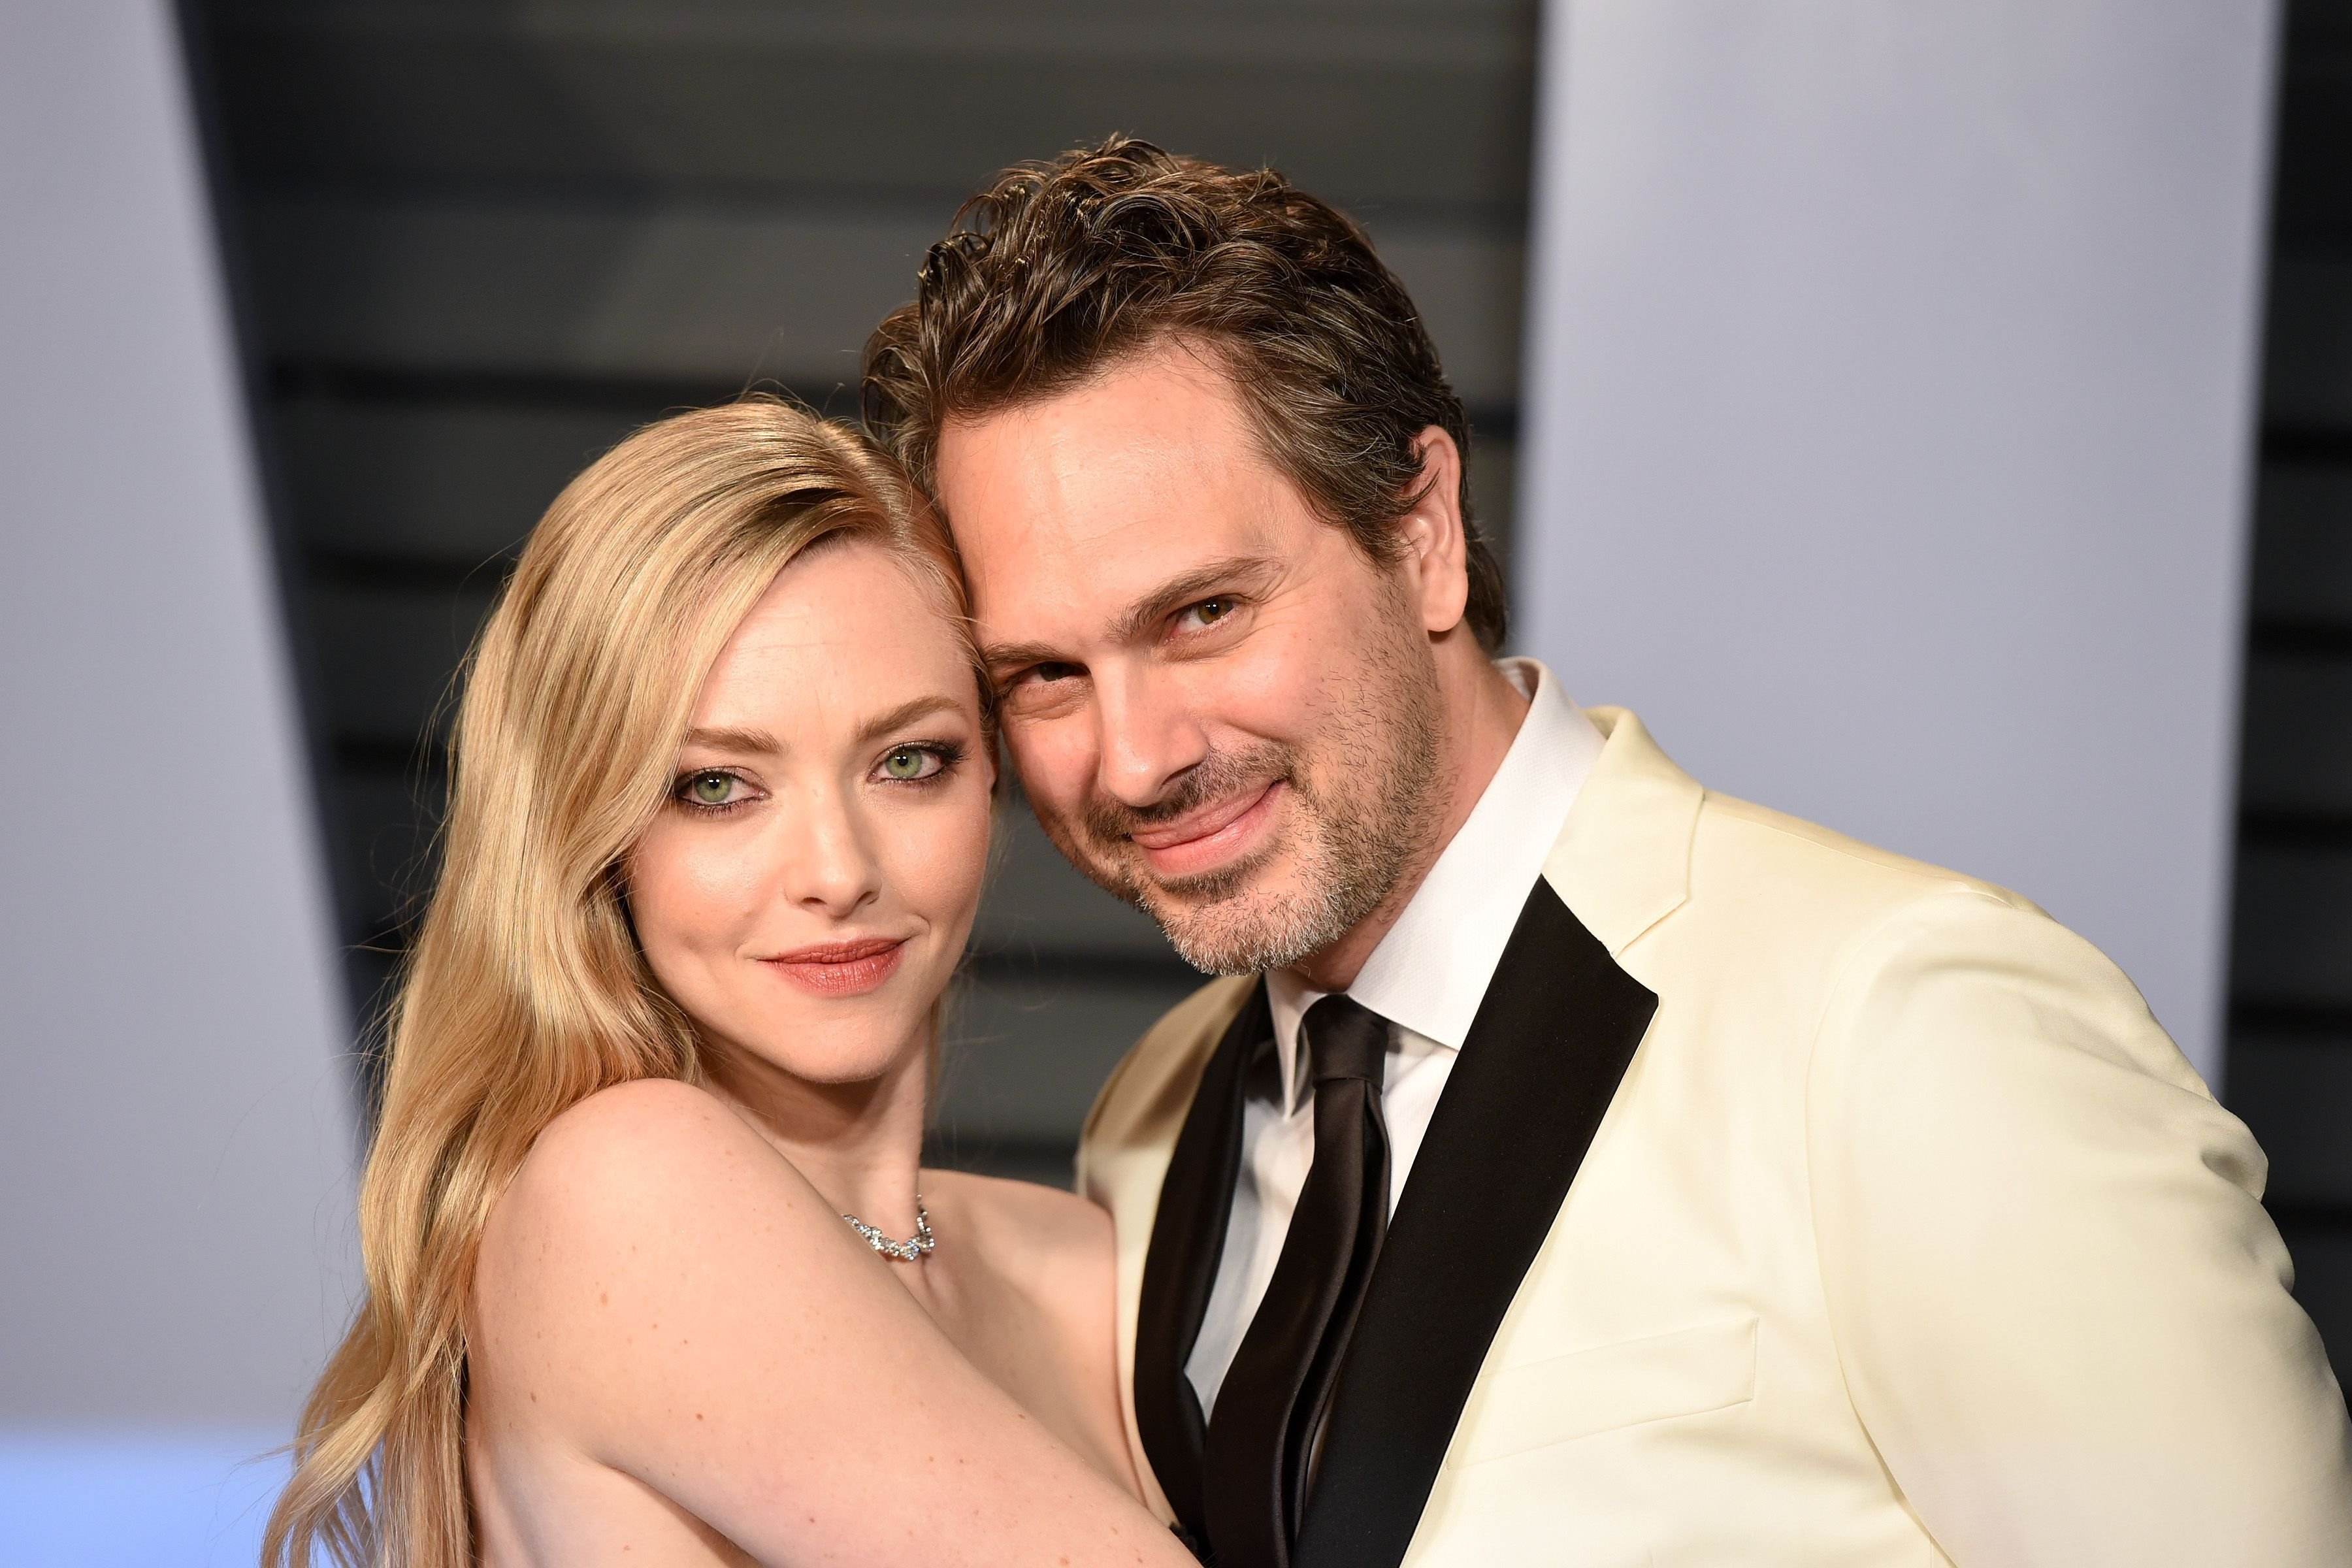 Amanda Seyfried and Thomas Sadoski at the 2018 Vanity Fair Oscar Party Hosted By Radhika Jones - Arrivals at Wallis Annenberg Center for the Performing Arts on March 4, 2018 in Beverly Hills, CA. | Photo: Getty Images